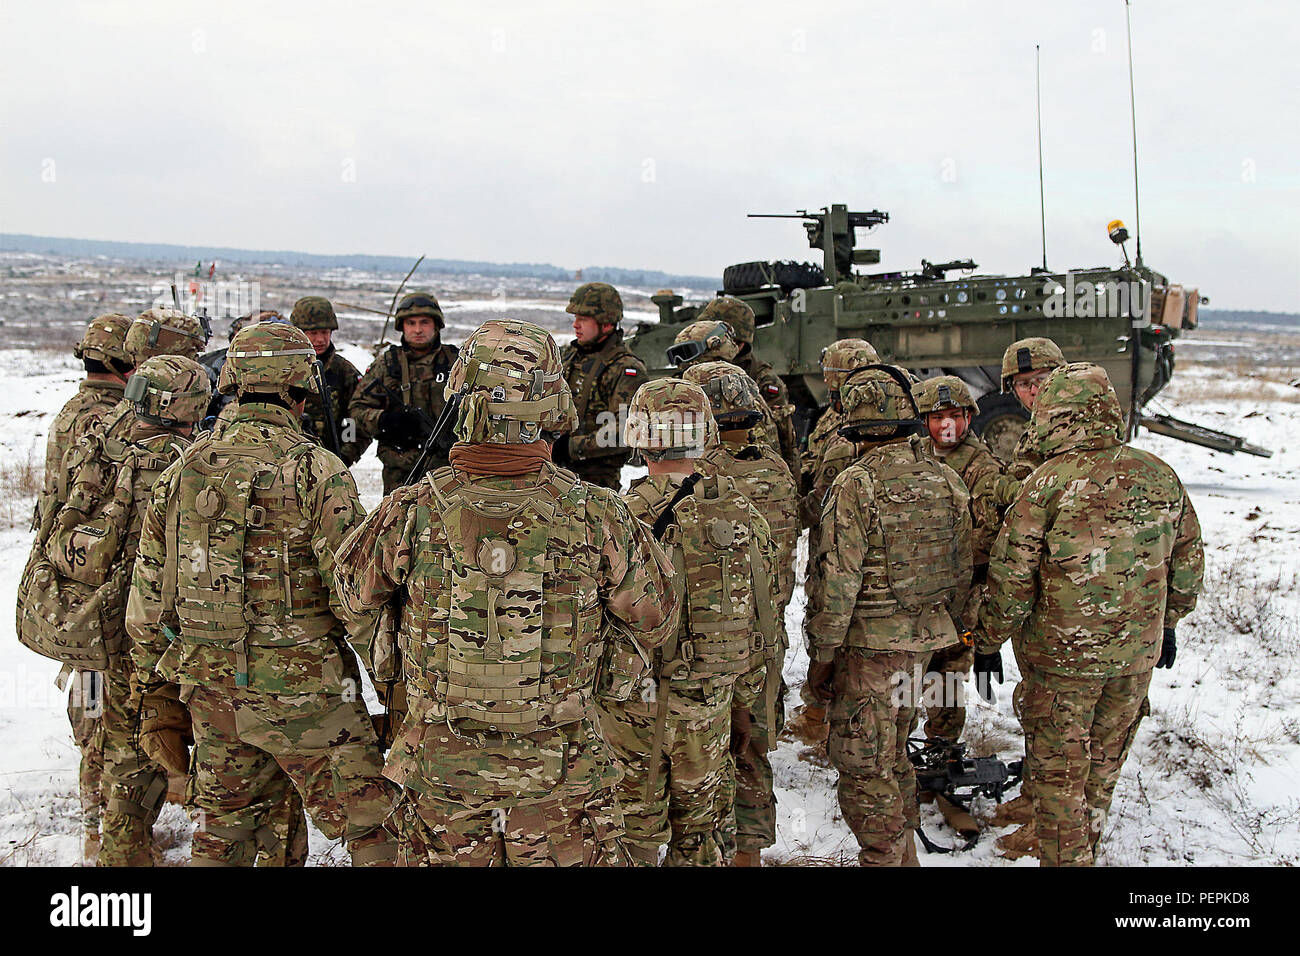 Soldiers assigned to K Troop, 3rd Squadron, 2nd Cavalry Regiment